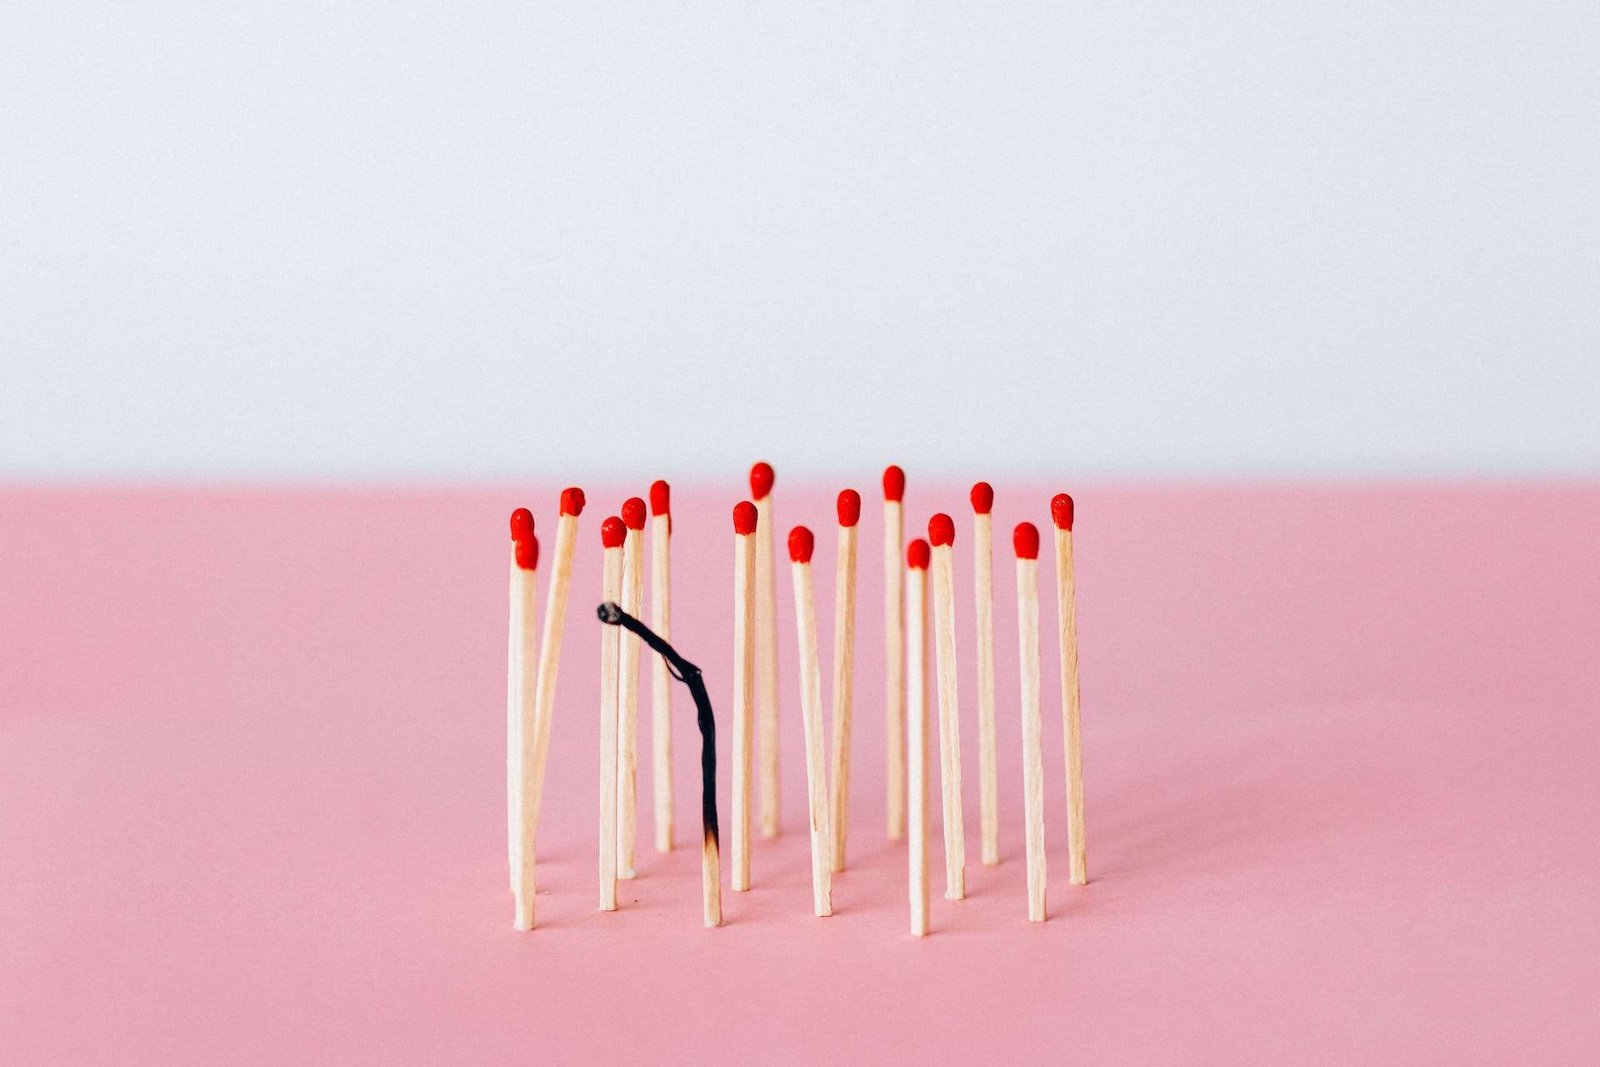 Unlit matches and one almost completely burnt down match standing on their ends on a pink surface.